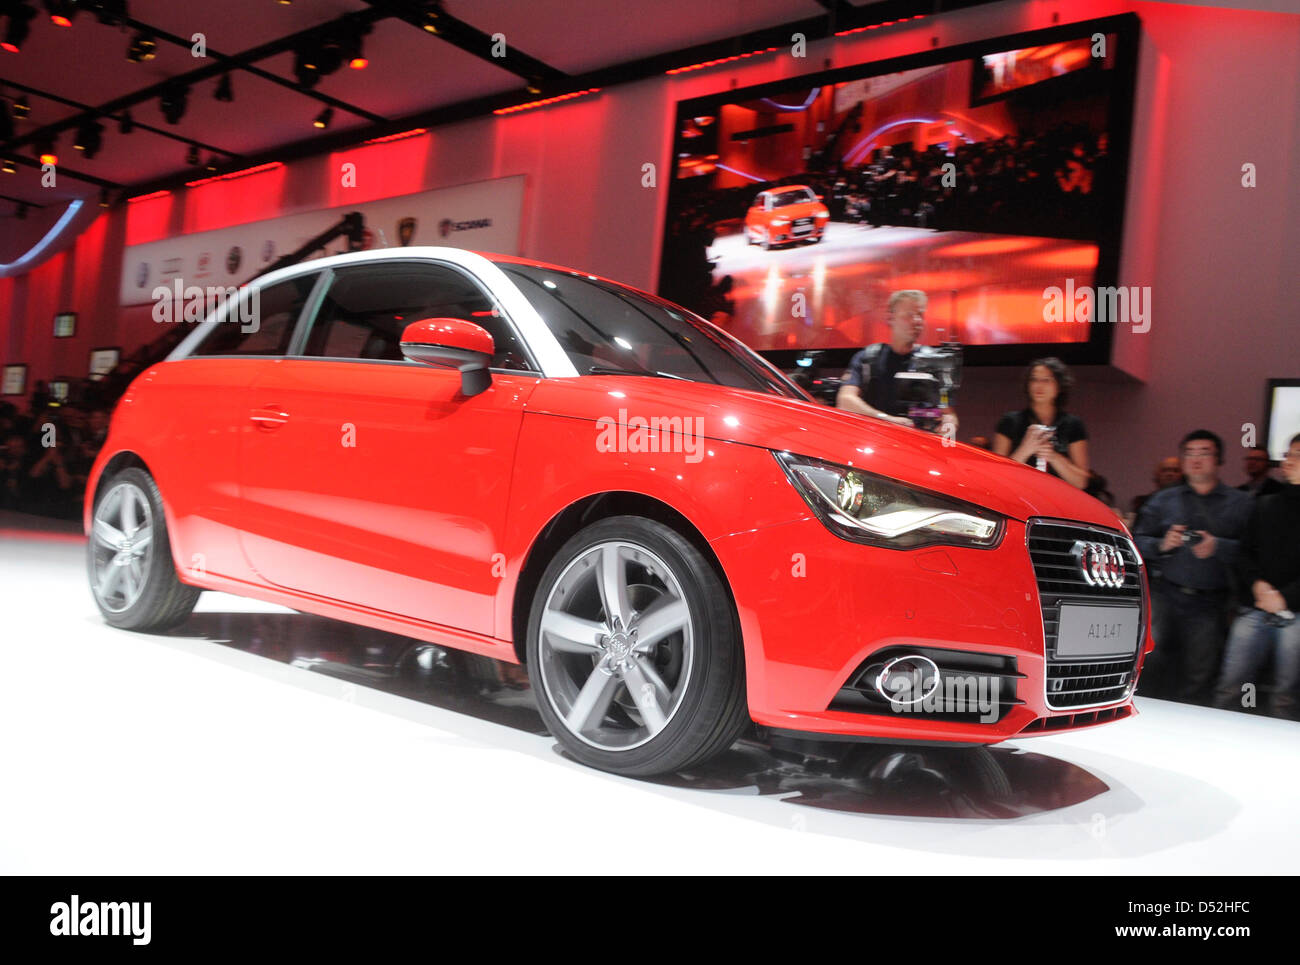 The new Audi A1 is presented prior to the first press day at the Geneva  Motor Show in Geneva, Switzerland, 01 March 2010. The 80th international  motor show in Geneva wants to